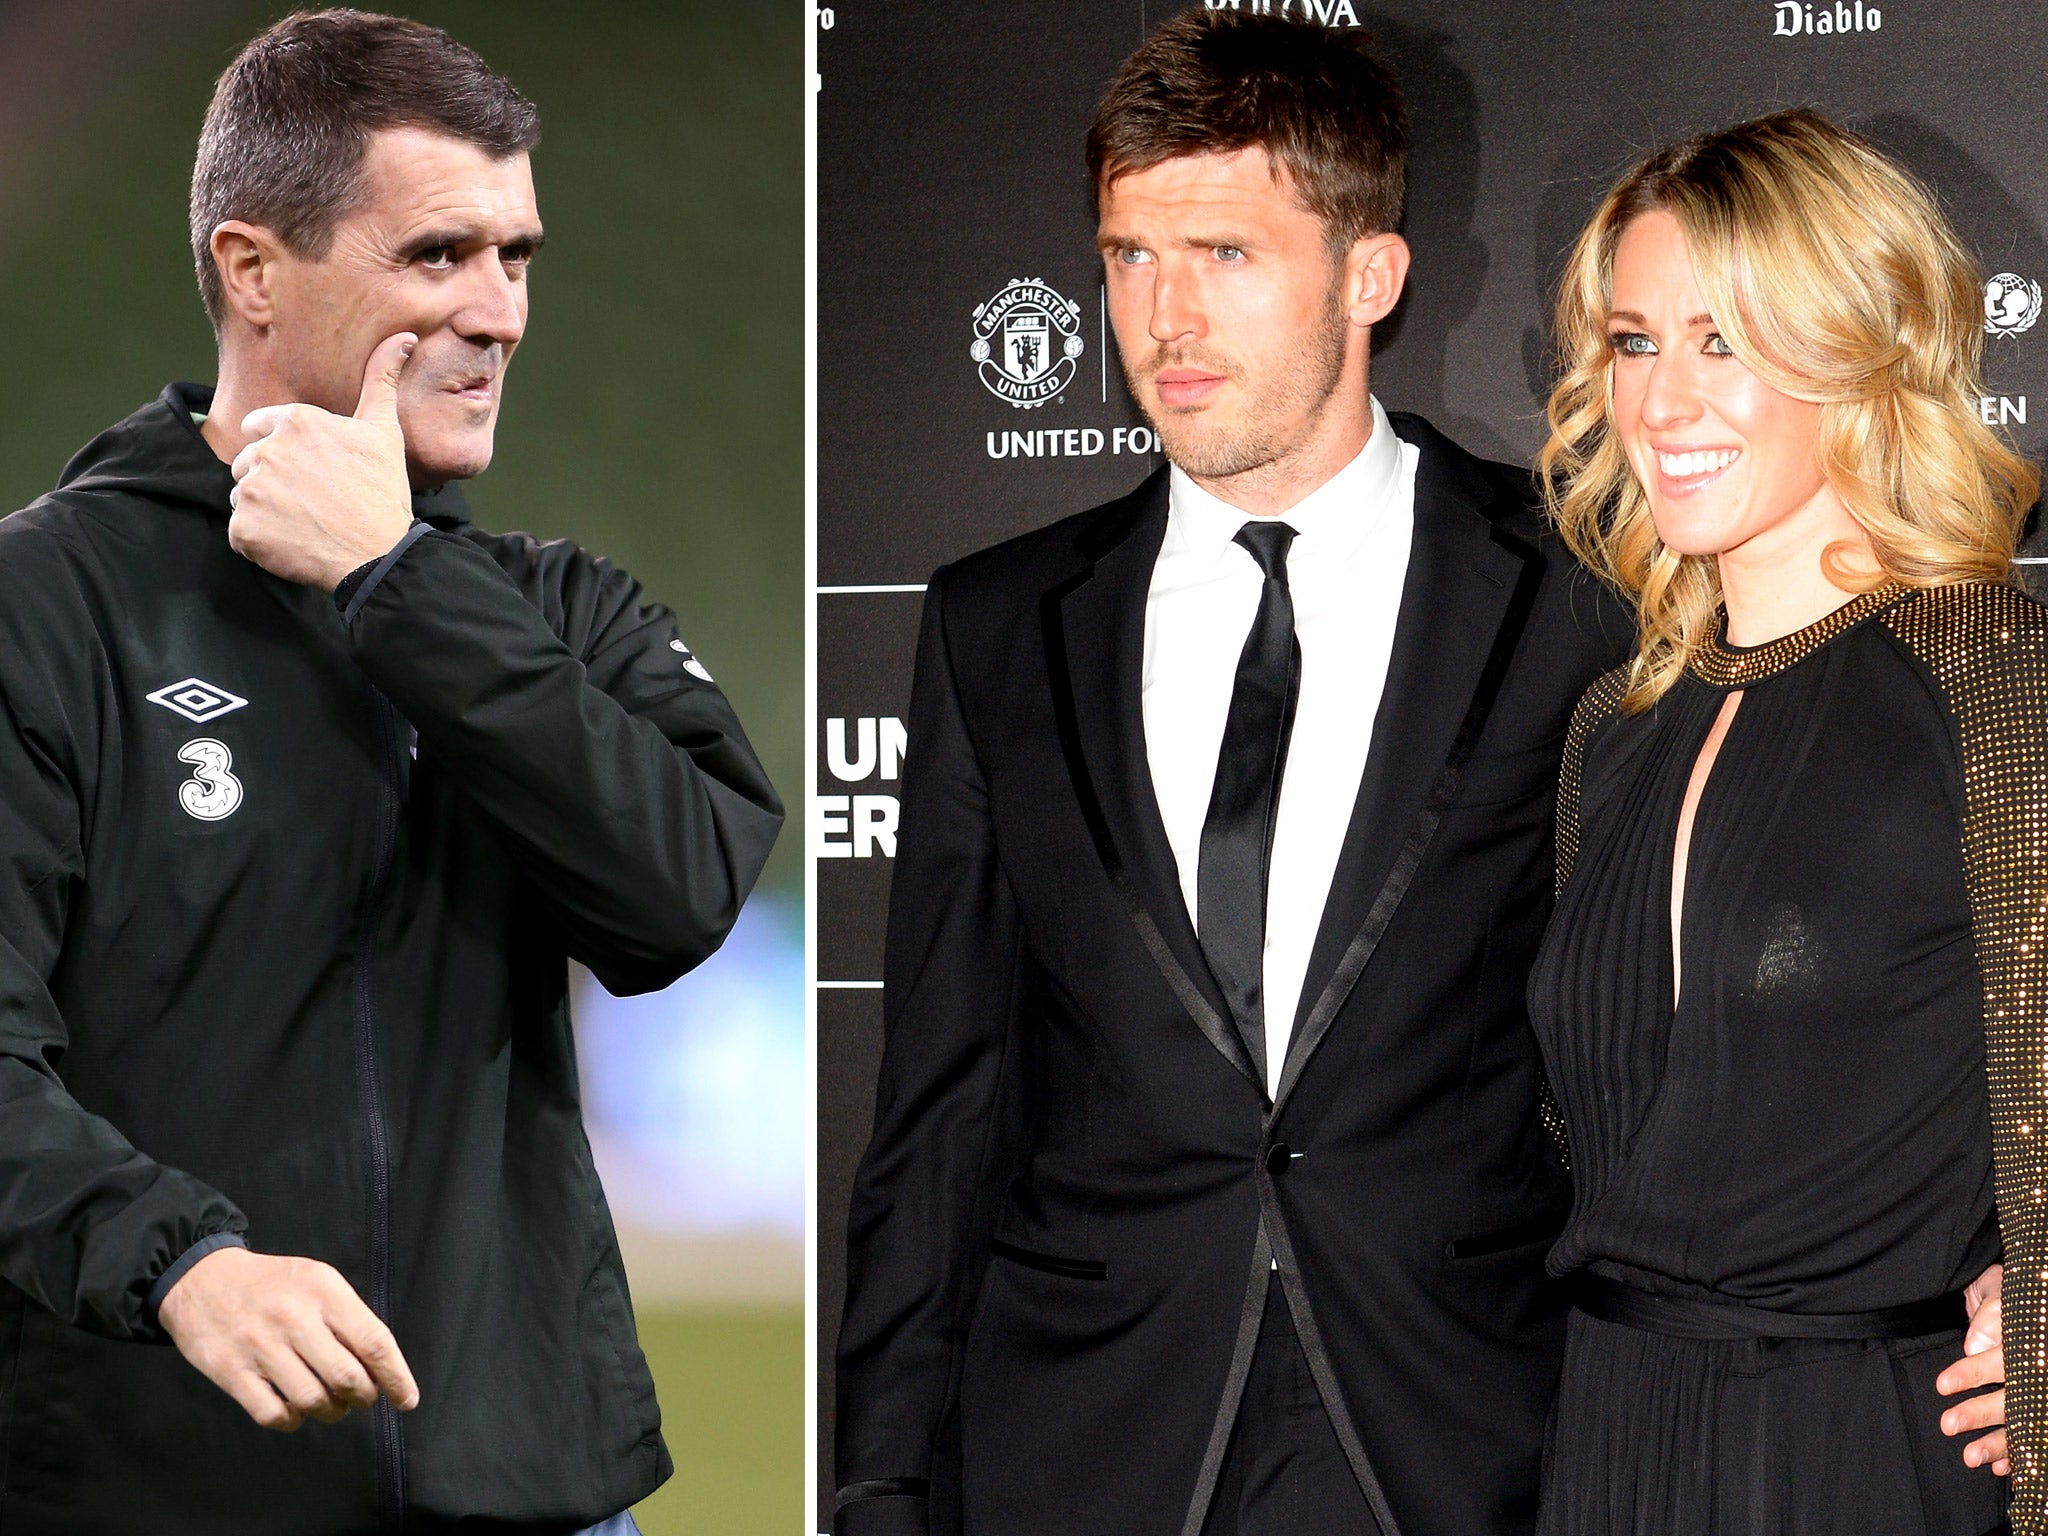 Roy Keane derided Michael Carrick for giving a ‘flat’ interview, which provoked his wife, Lisa